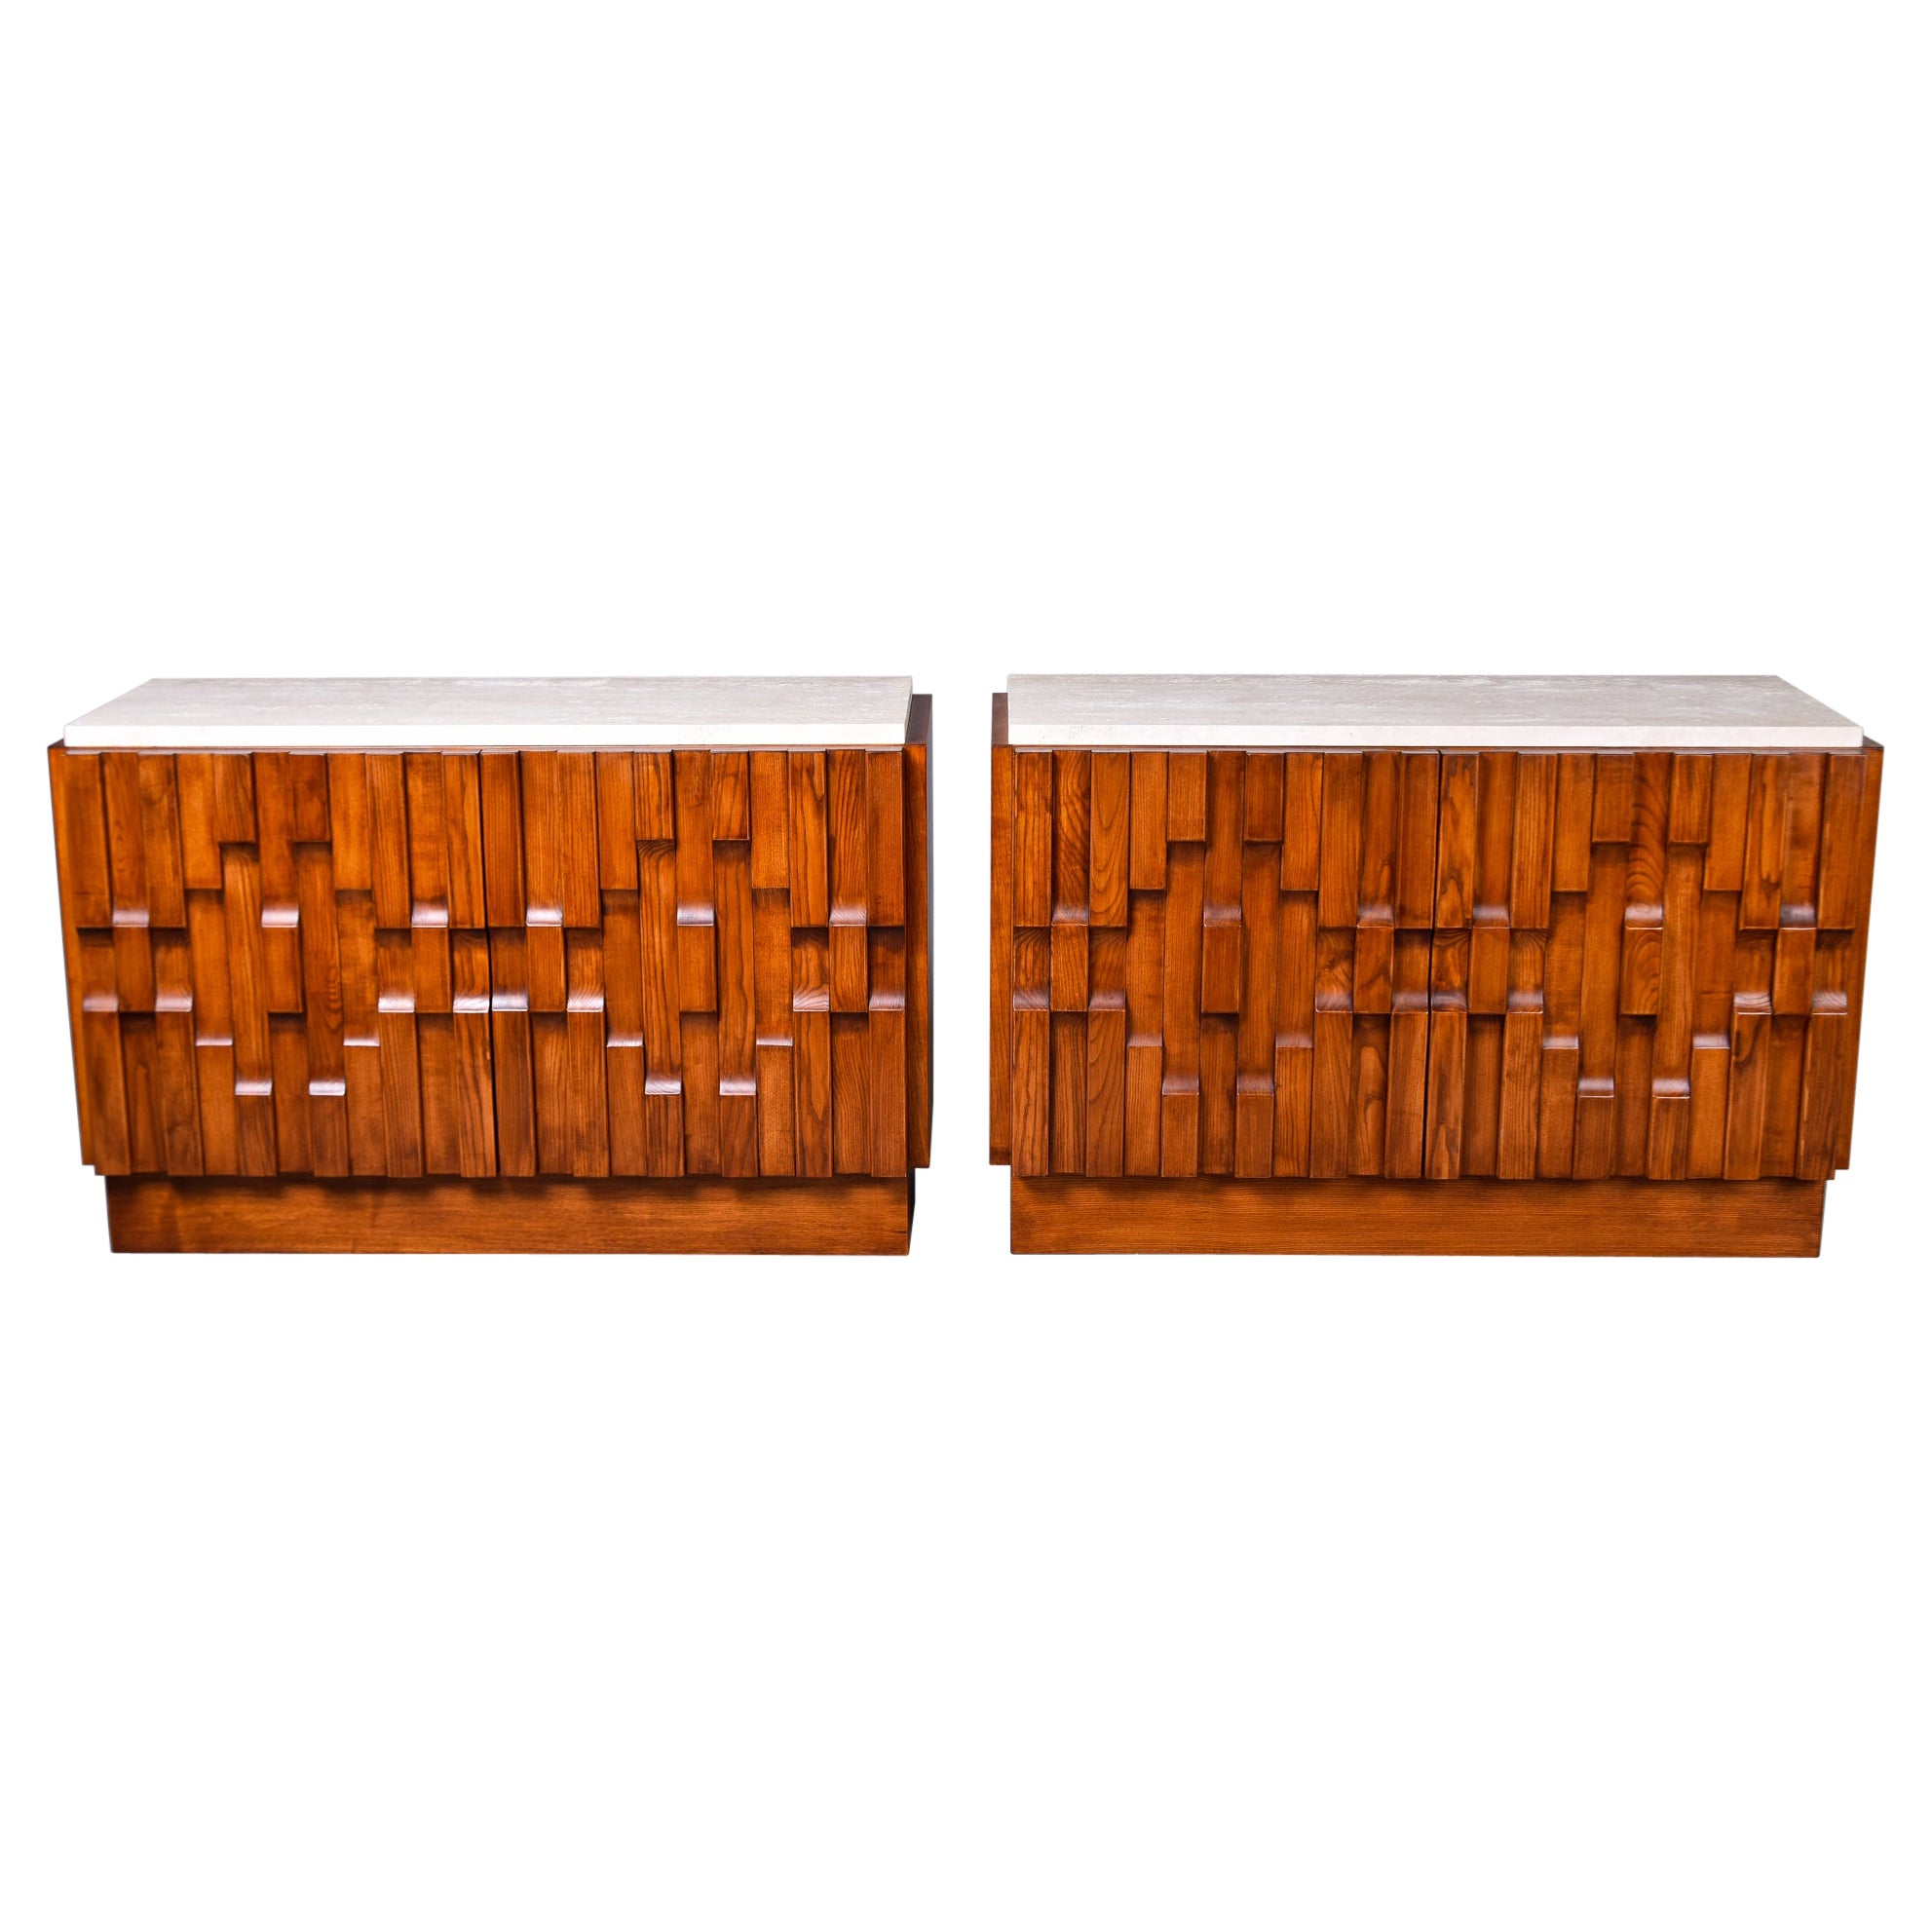 Pair Bespoke Brutalist Style Oak Chests with Travertine Tops   Cabinets without  For Sale